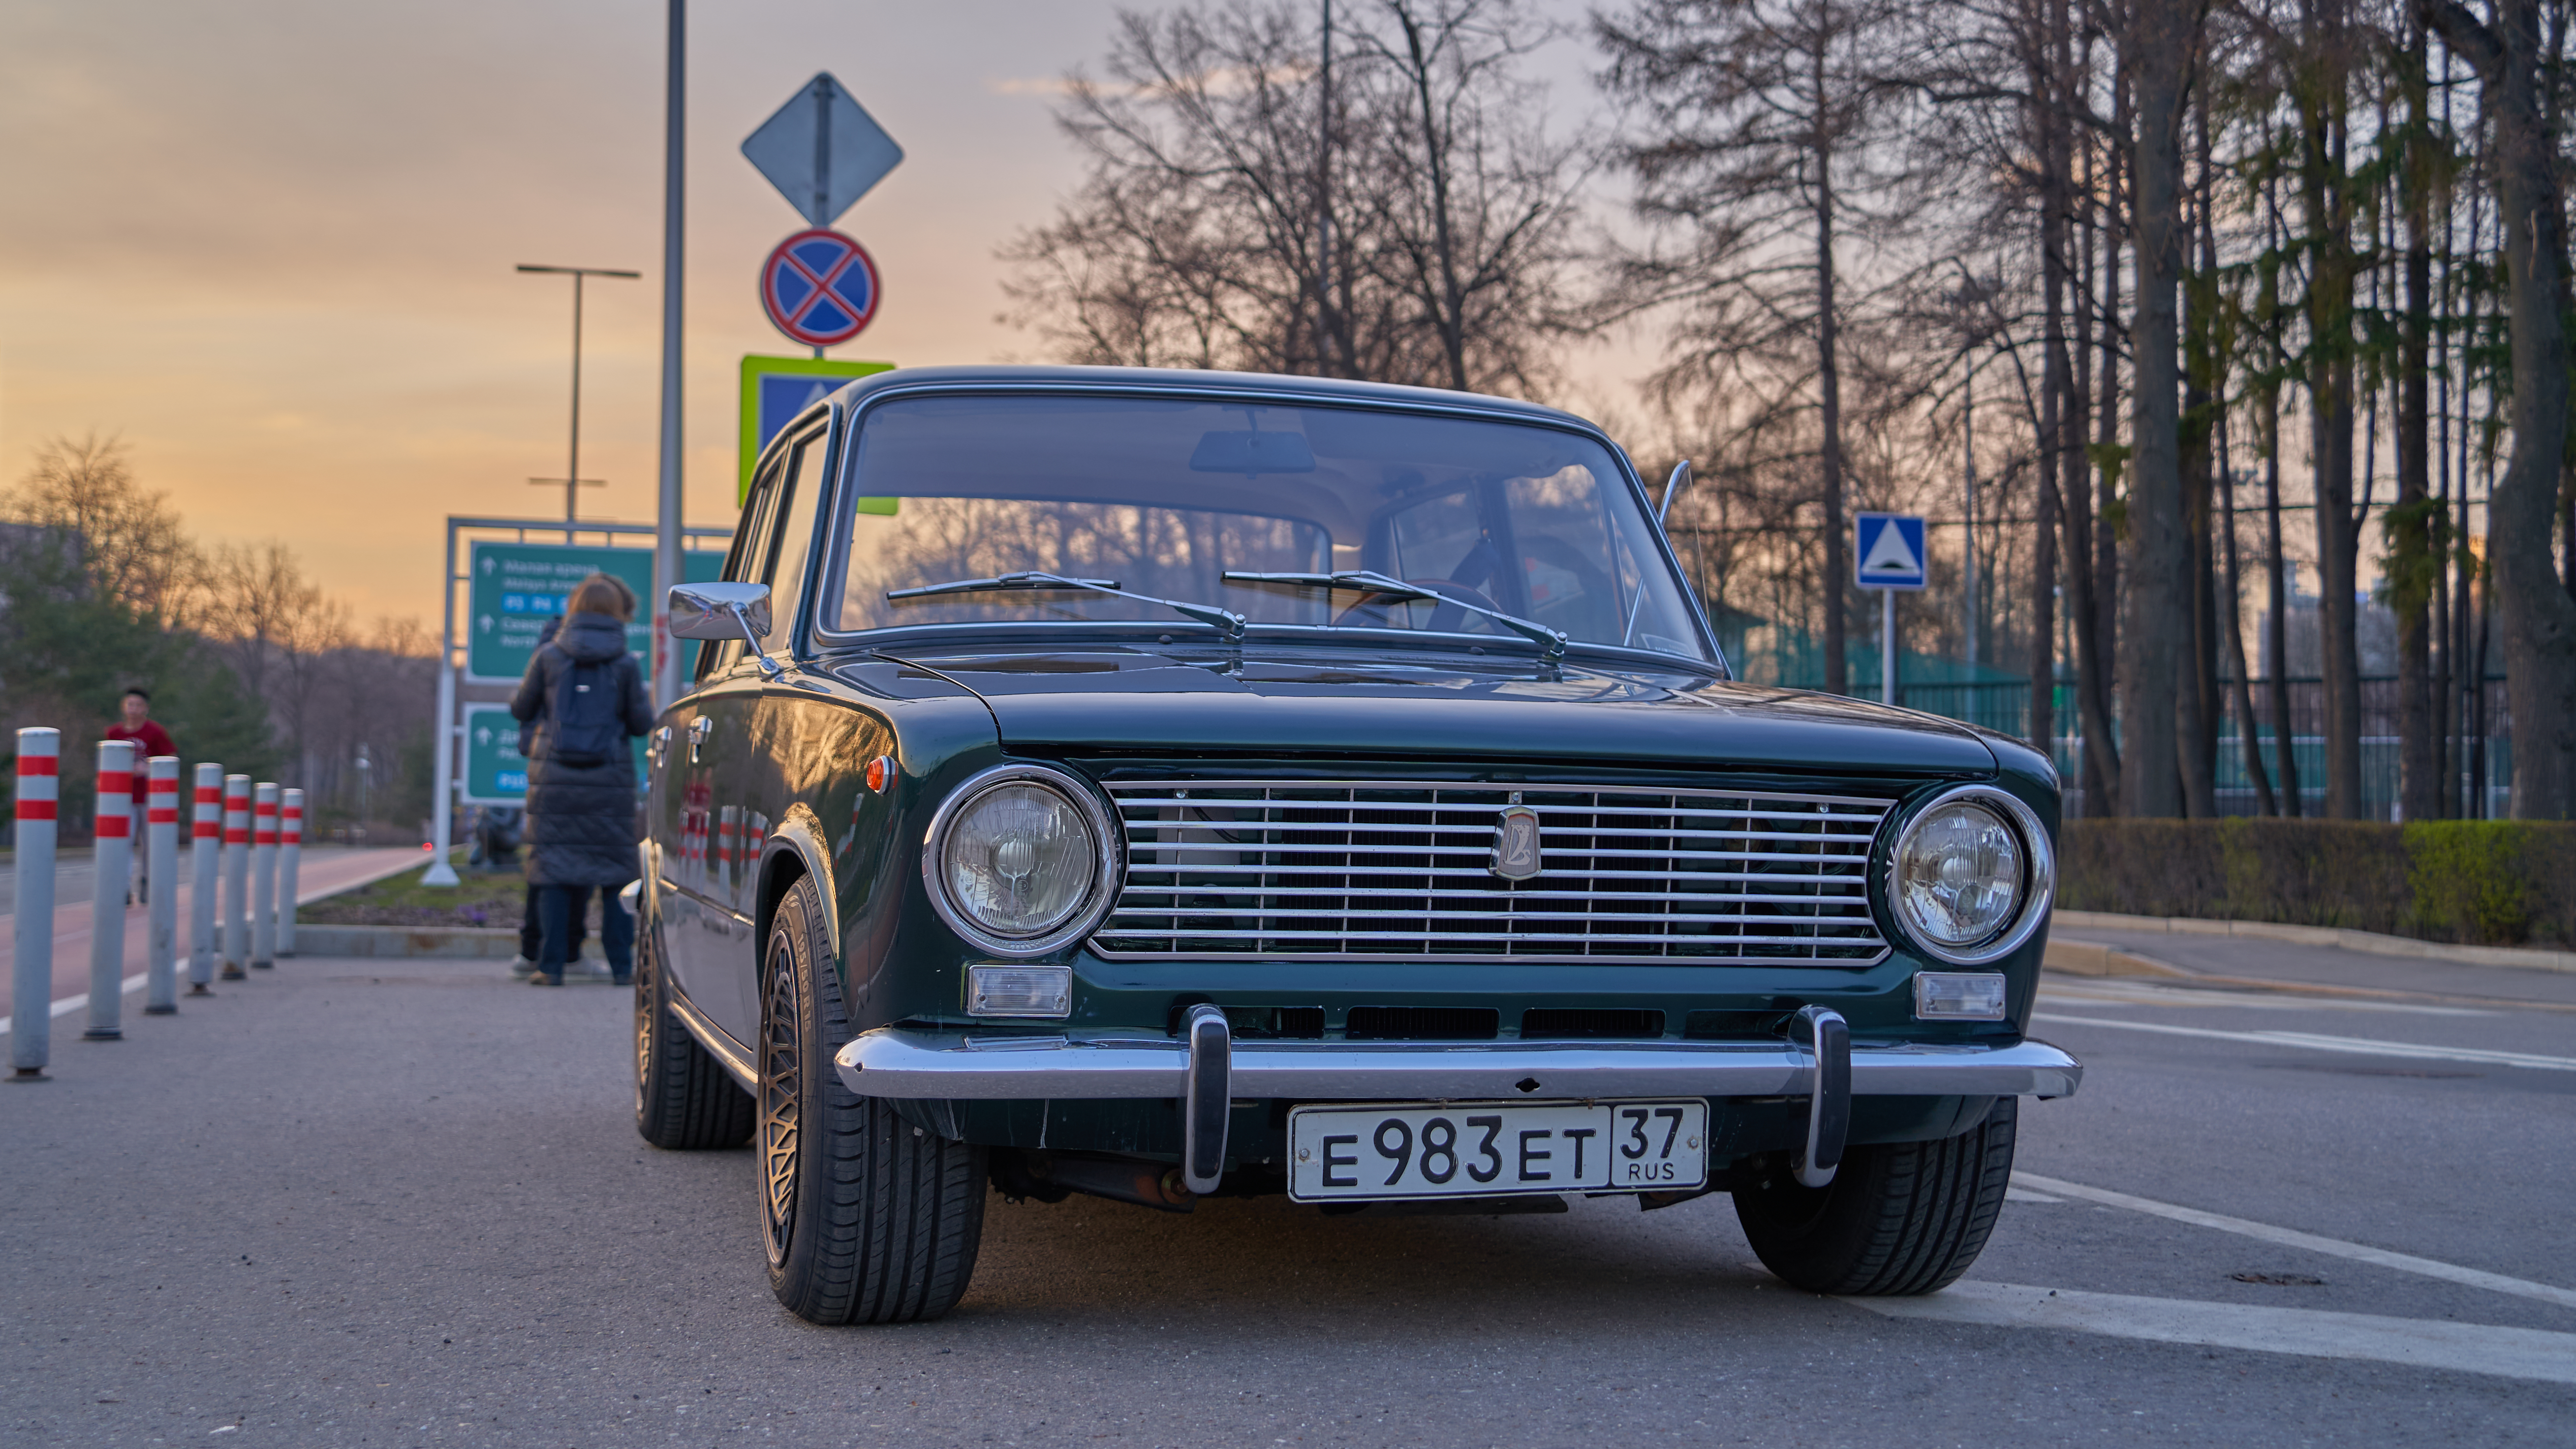 Car LADA Russian Cars Moscow Sunset Road 5235x2945